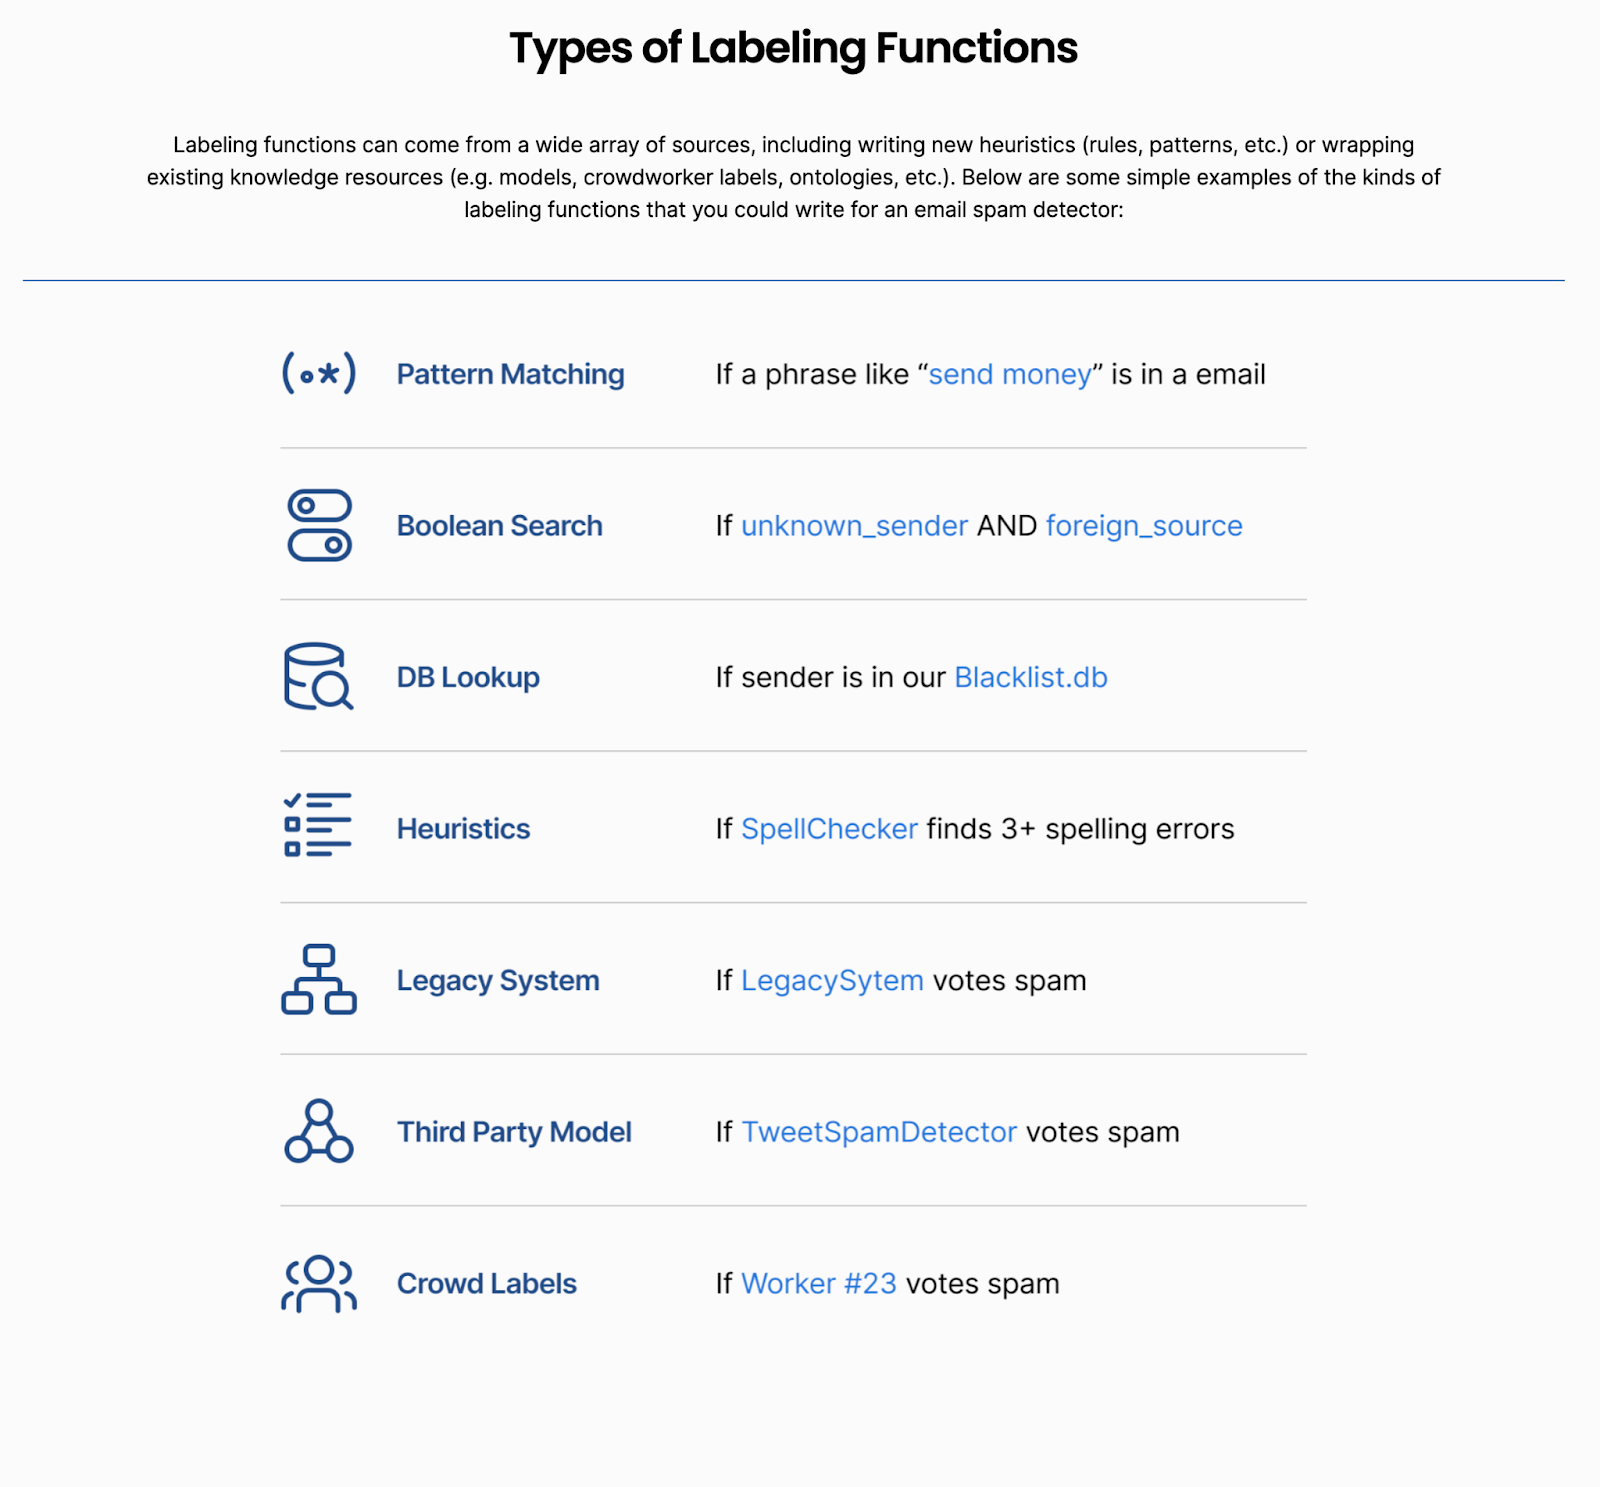 Types of labeling functions